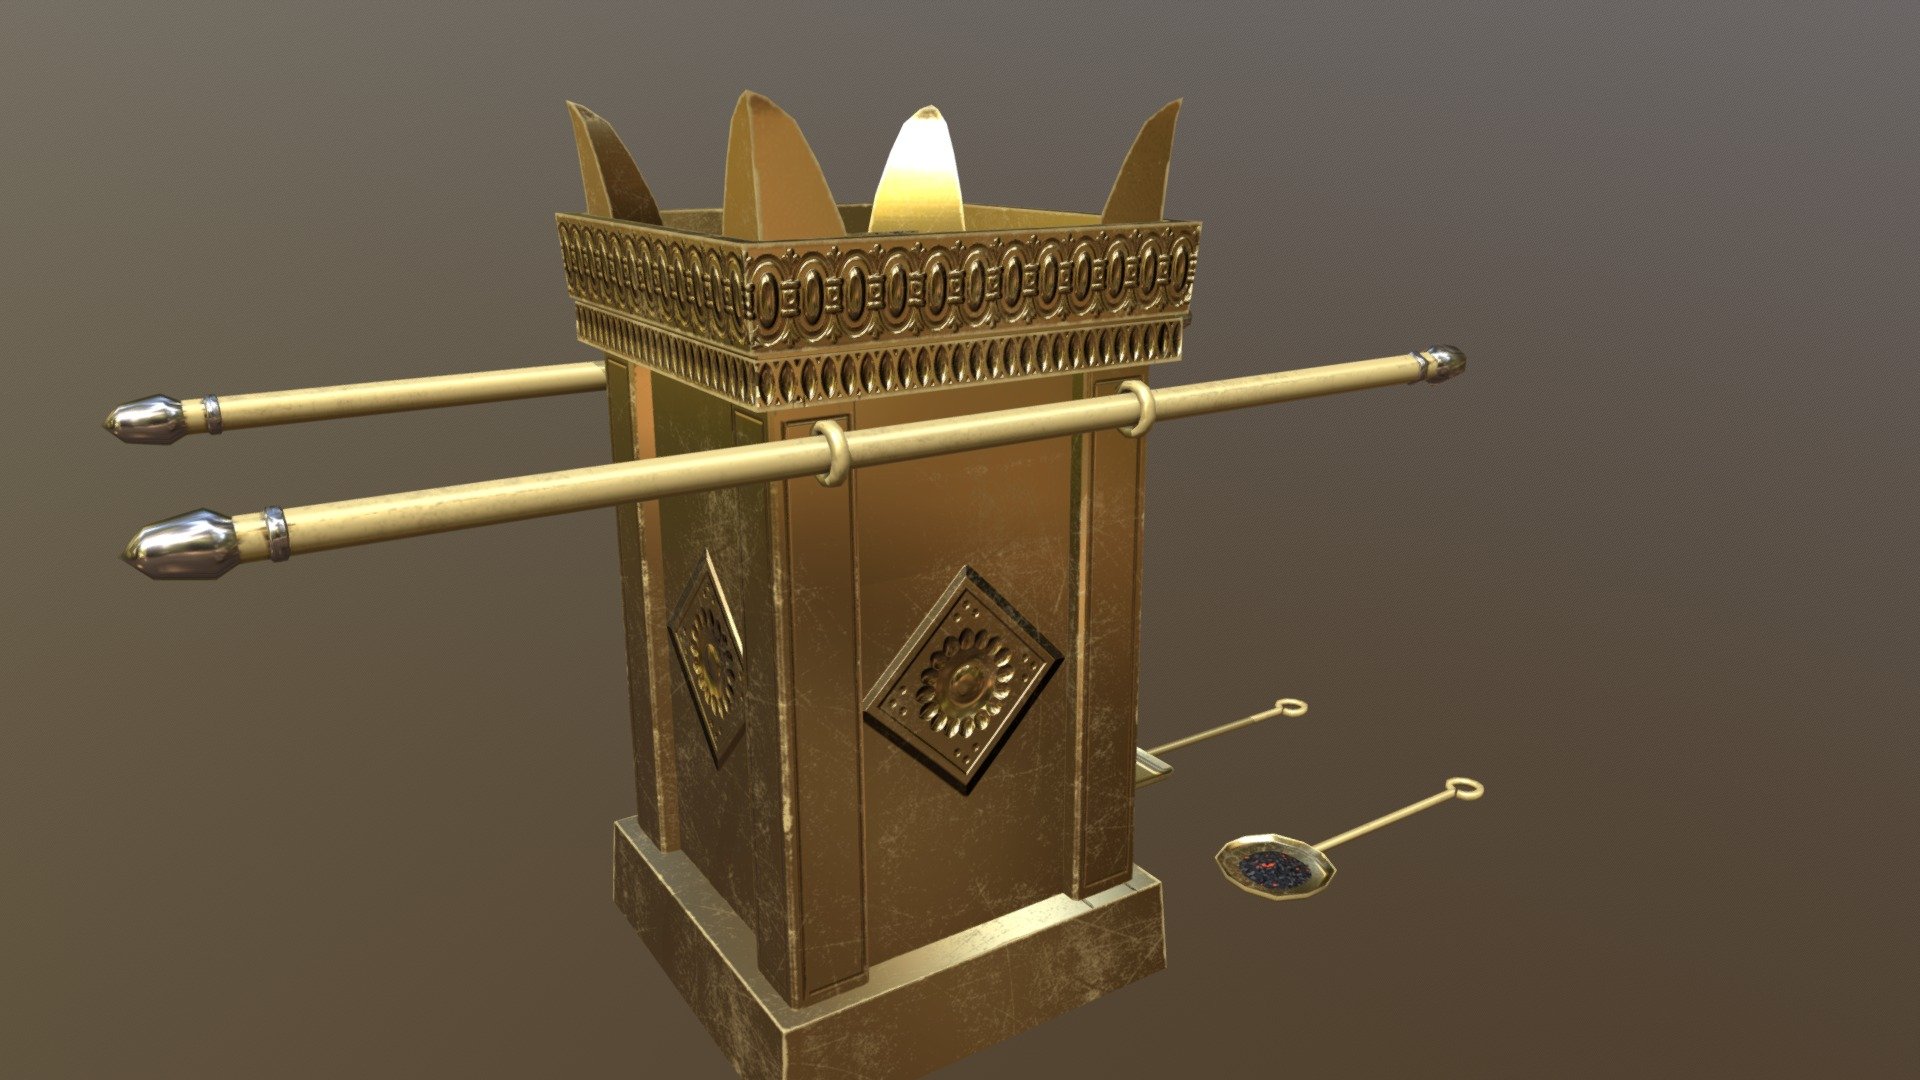 The Incense Altar designed based on information found in the King James Bible - Incense Altar - Temple of Herod - 3D model by Trikery 3d model